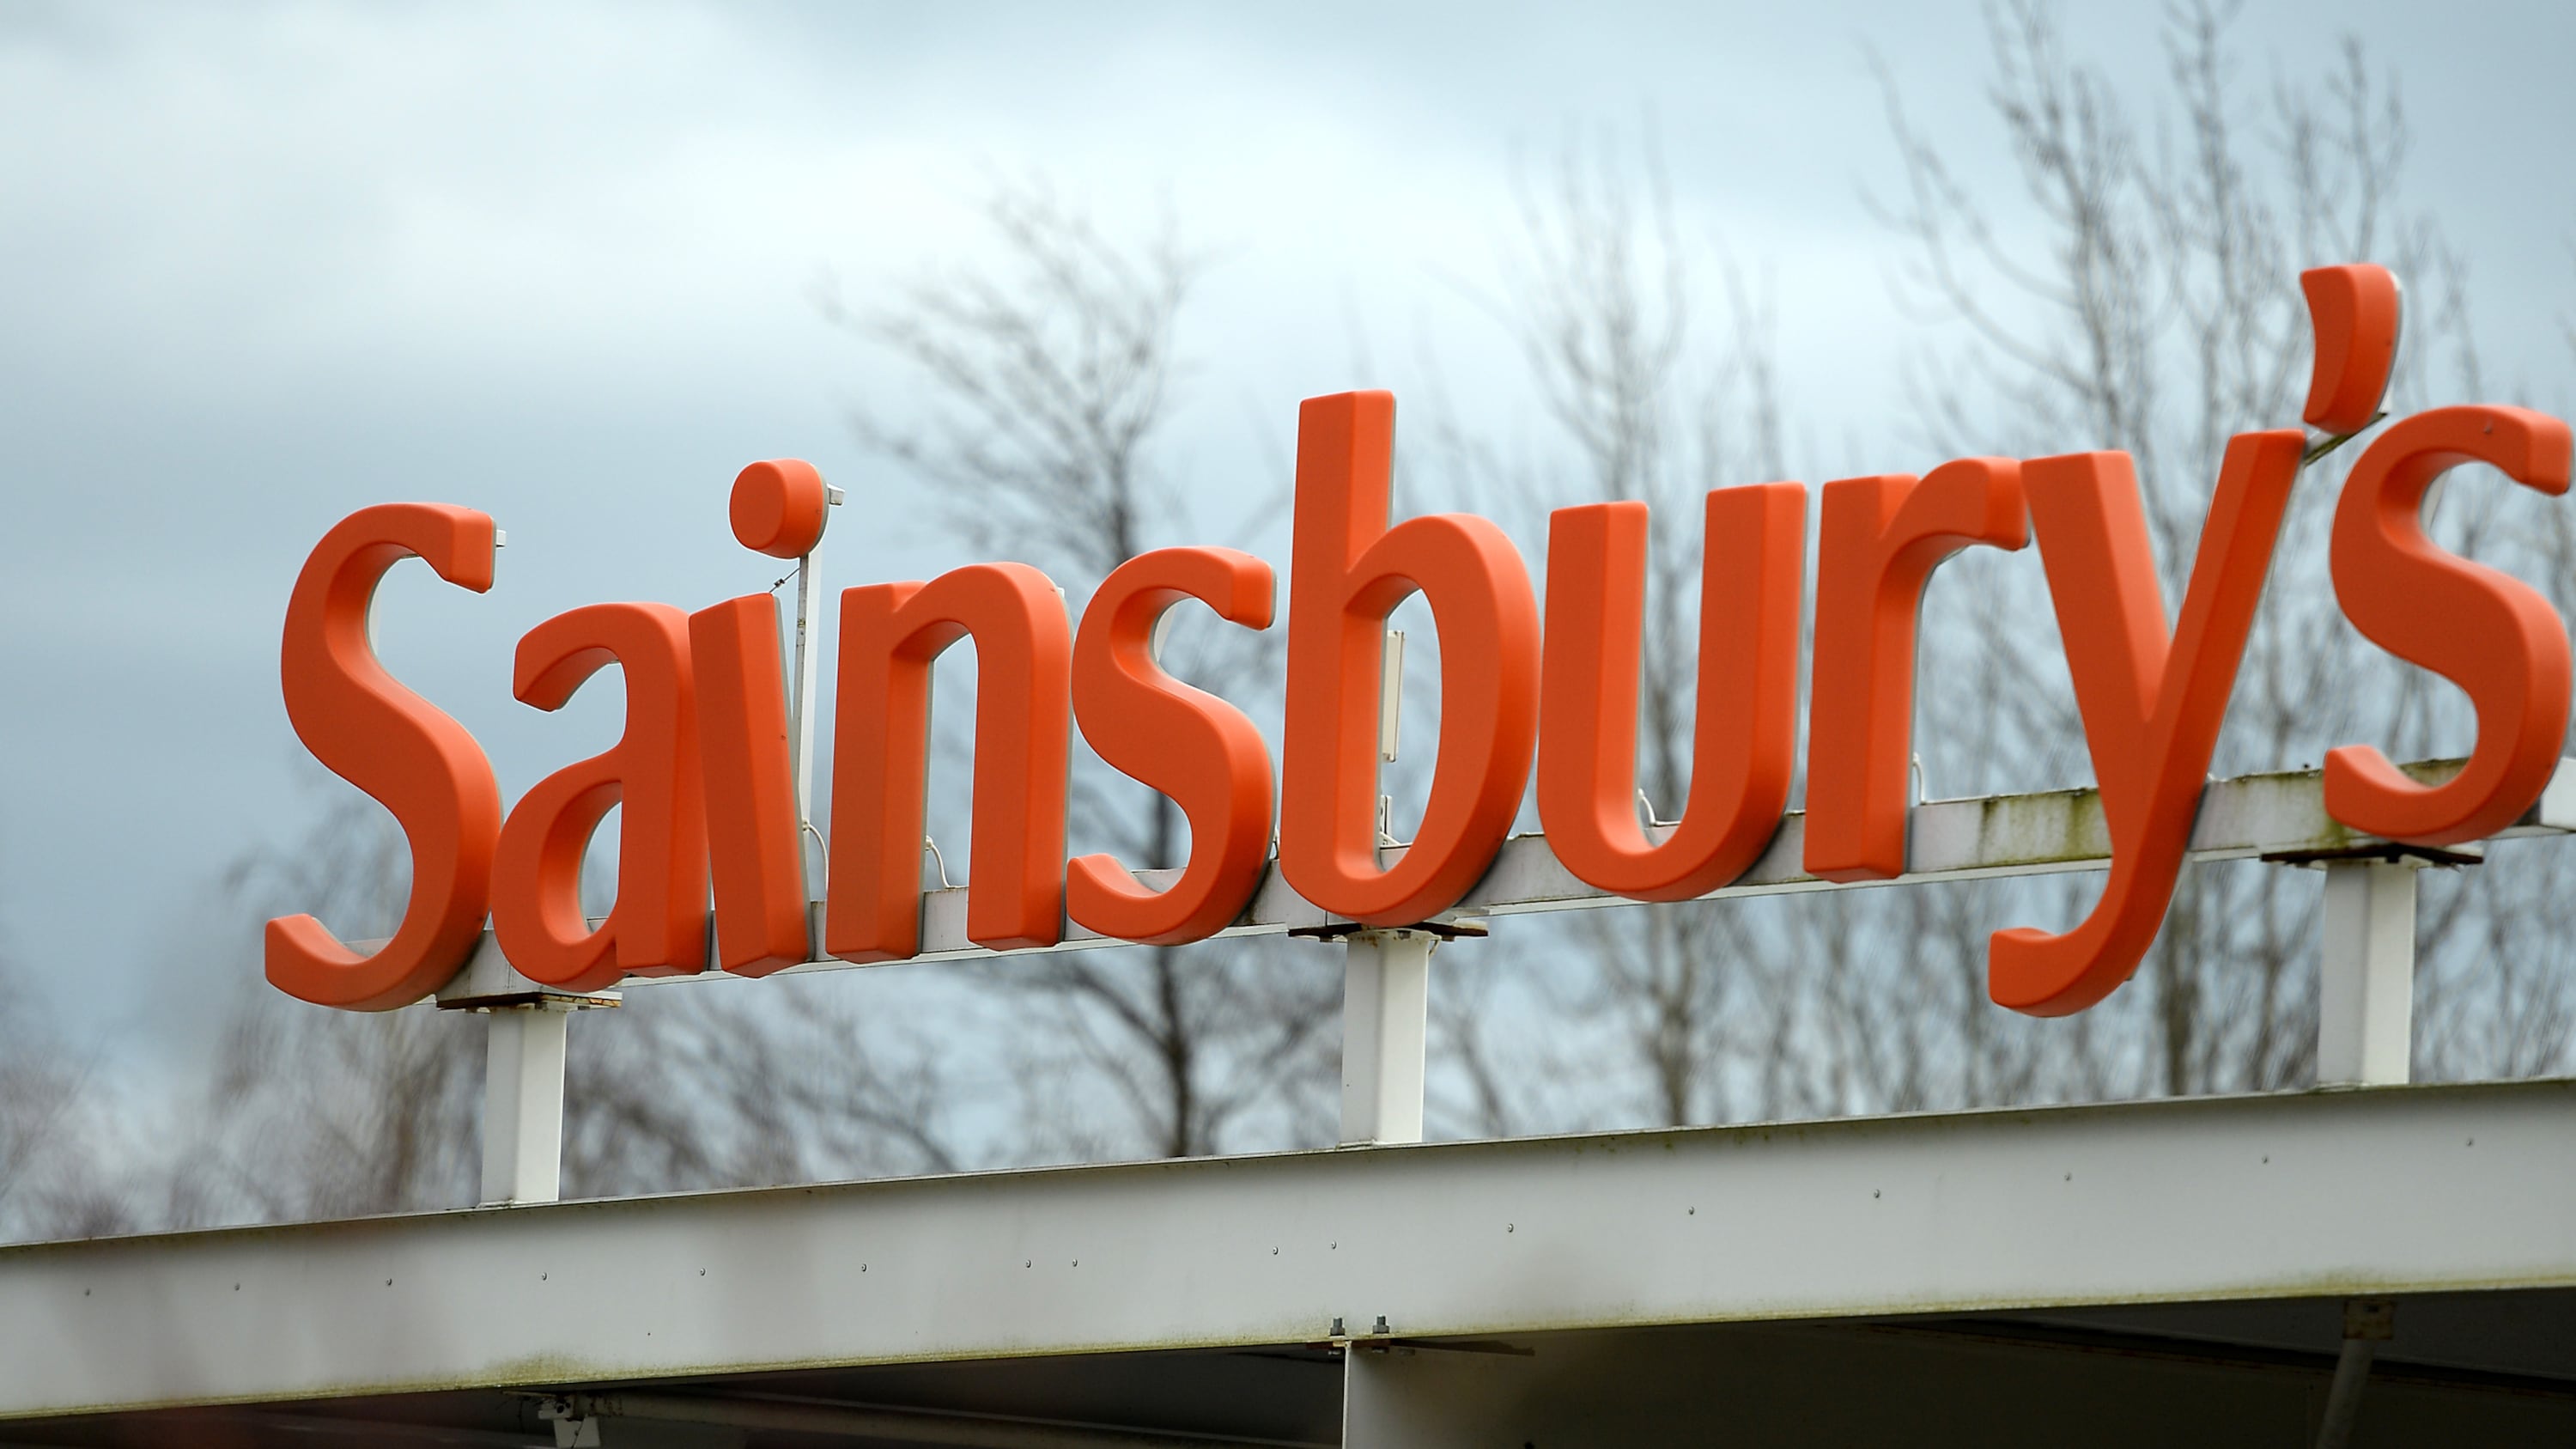 Sainsbury’s has notched up a rise in first-quarter sales